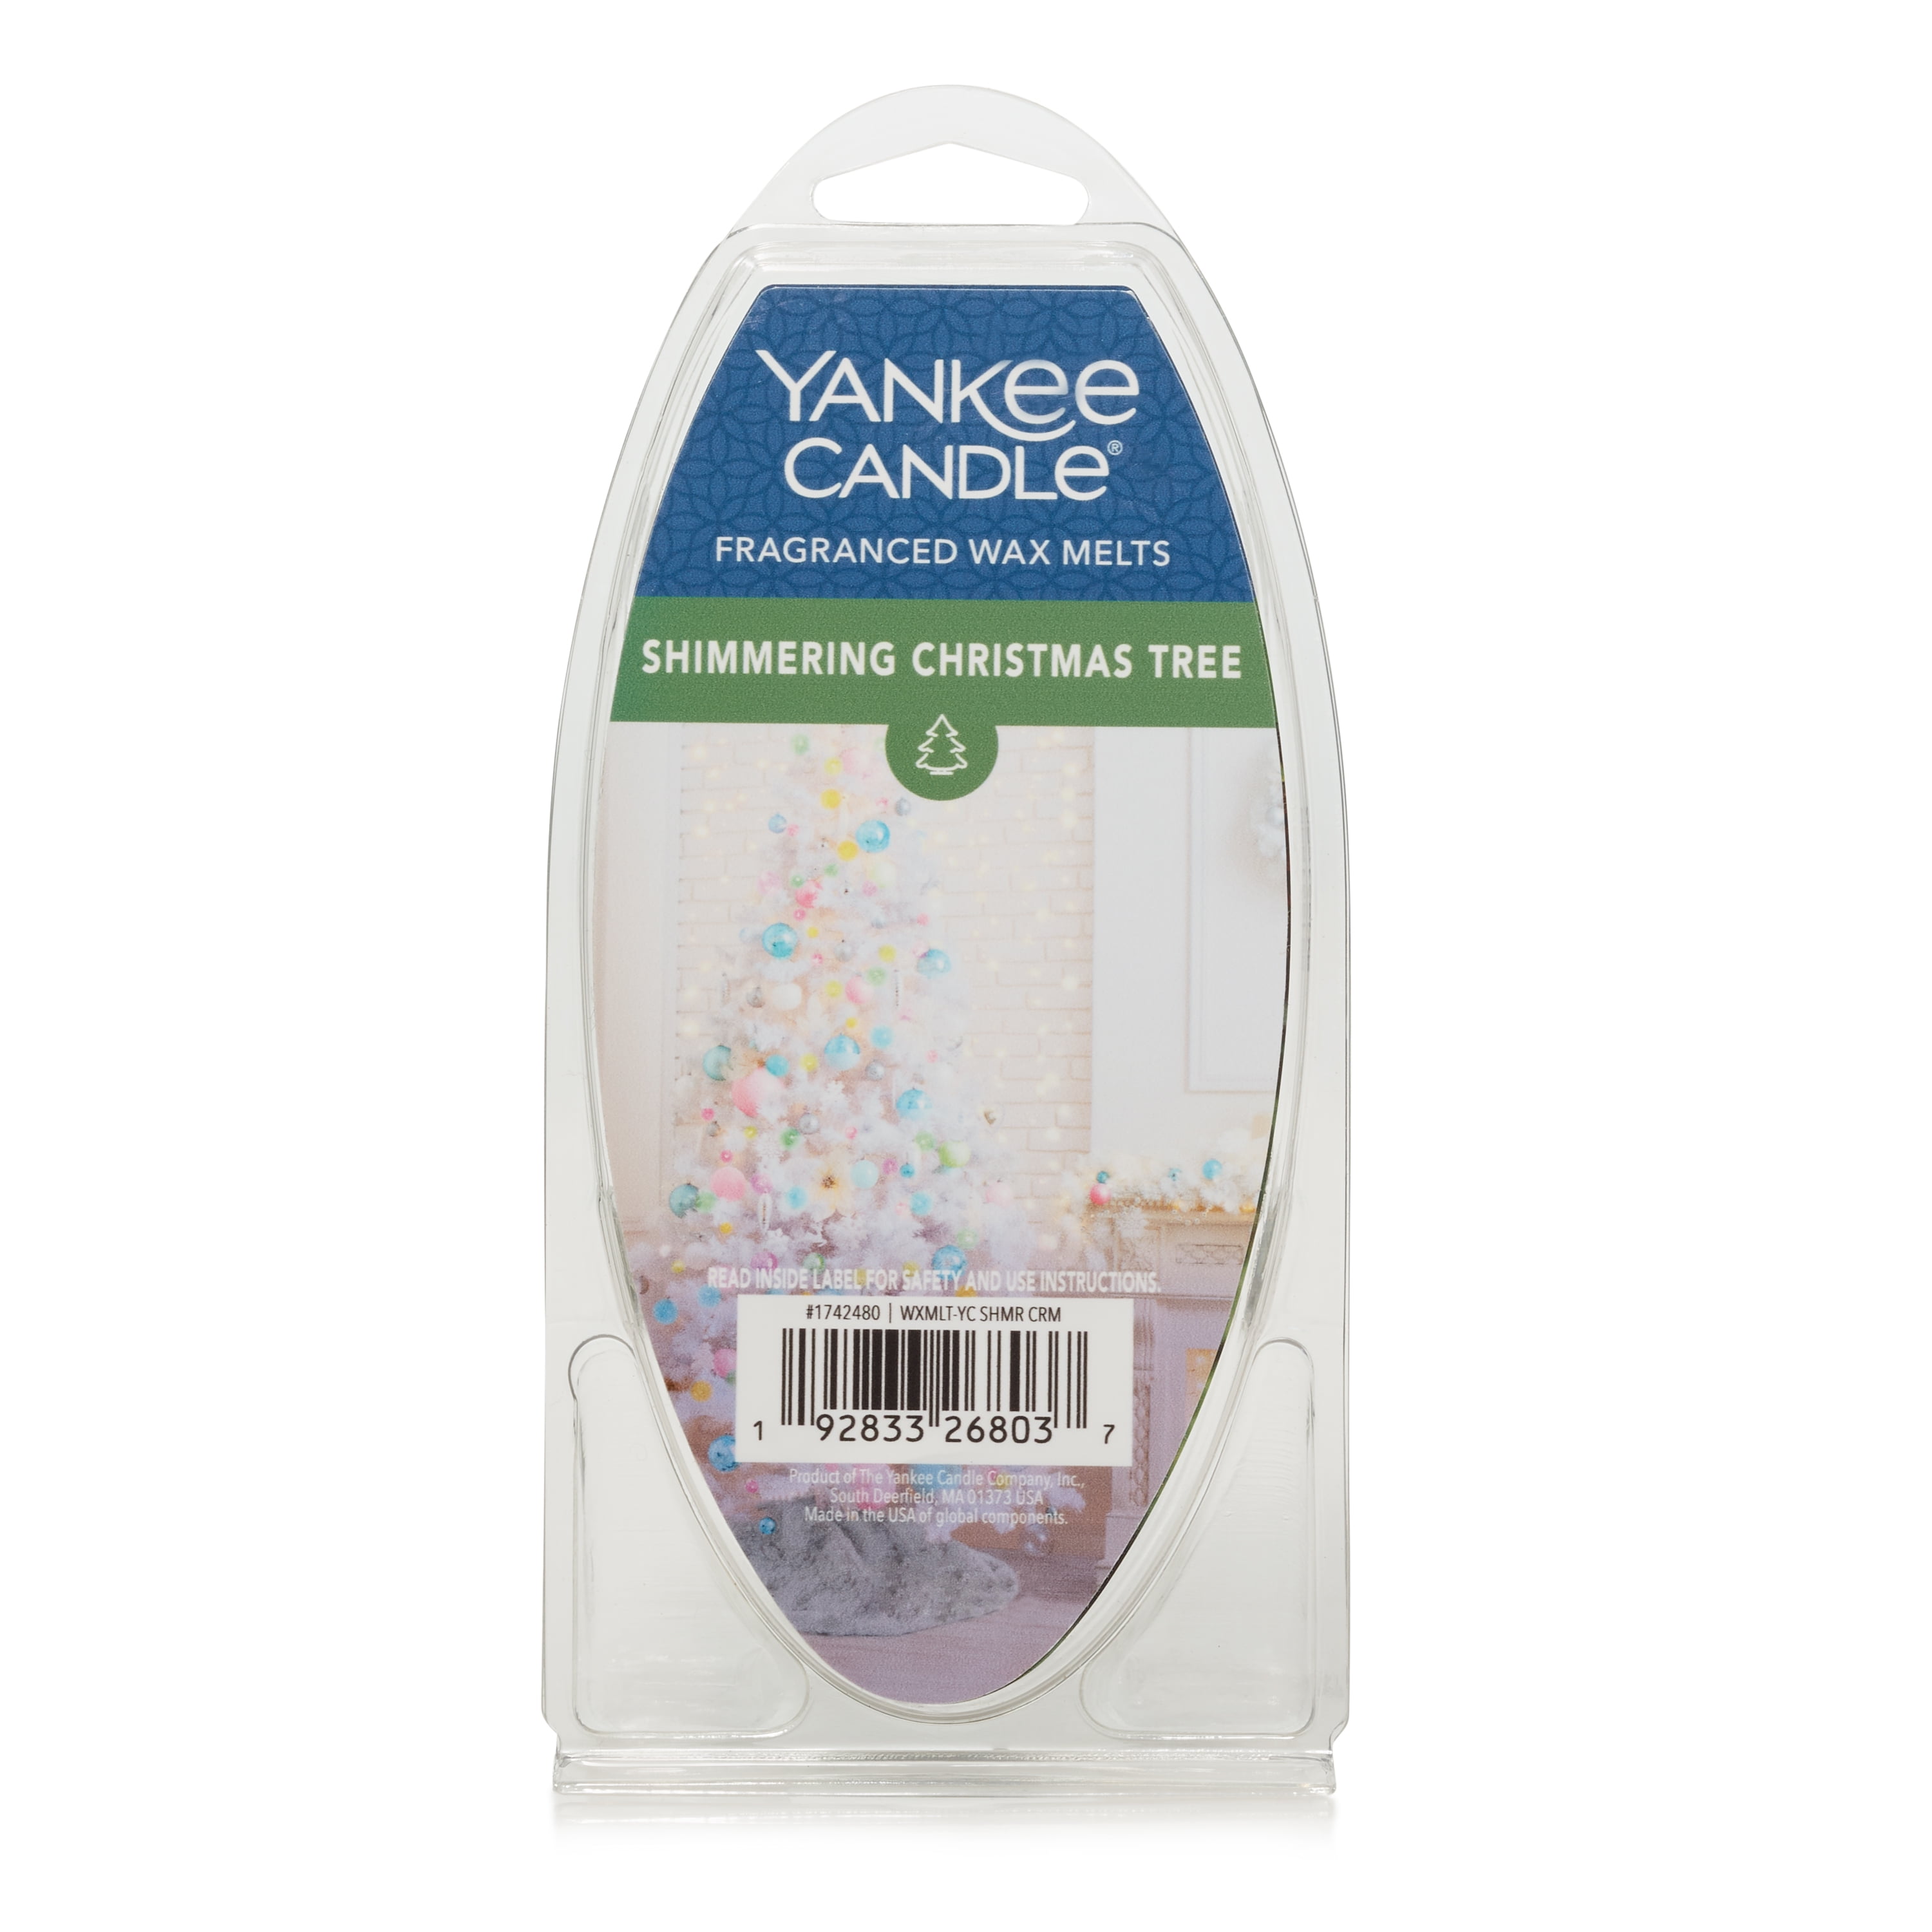 Yankee Candle Fragranced Wax Melts - Christmas Cookie